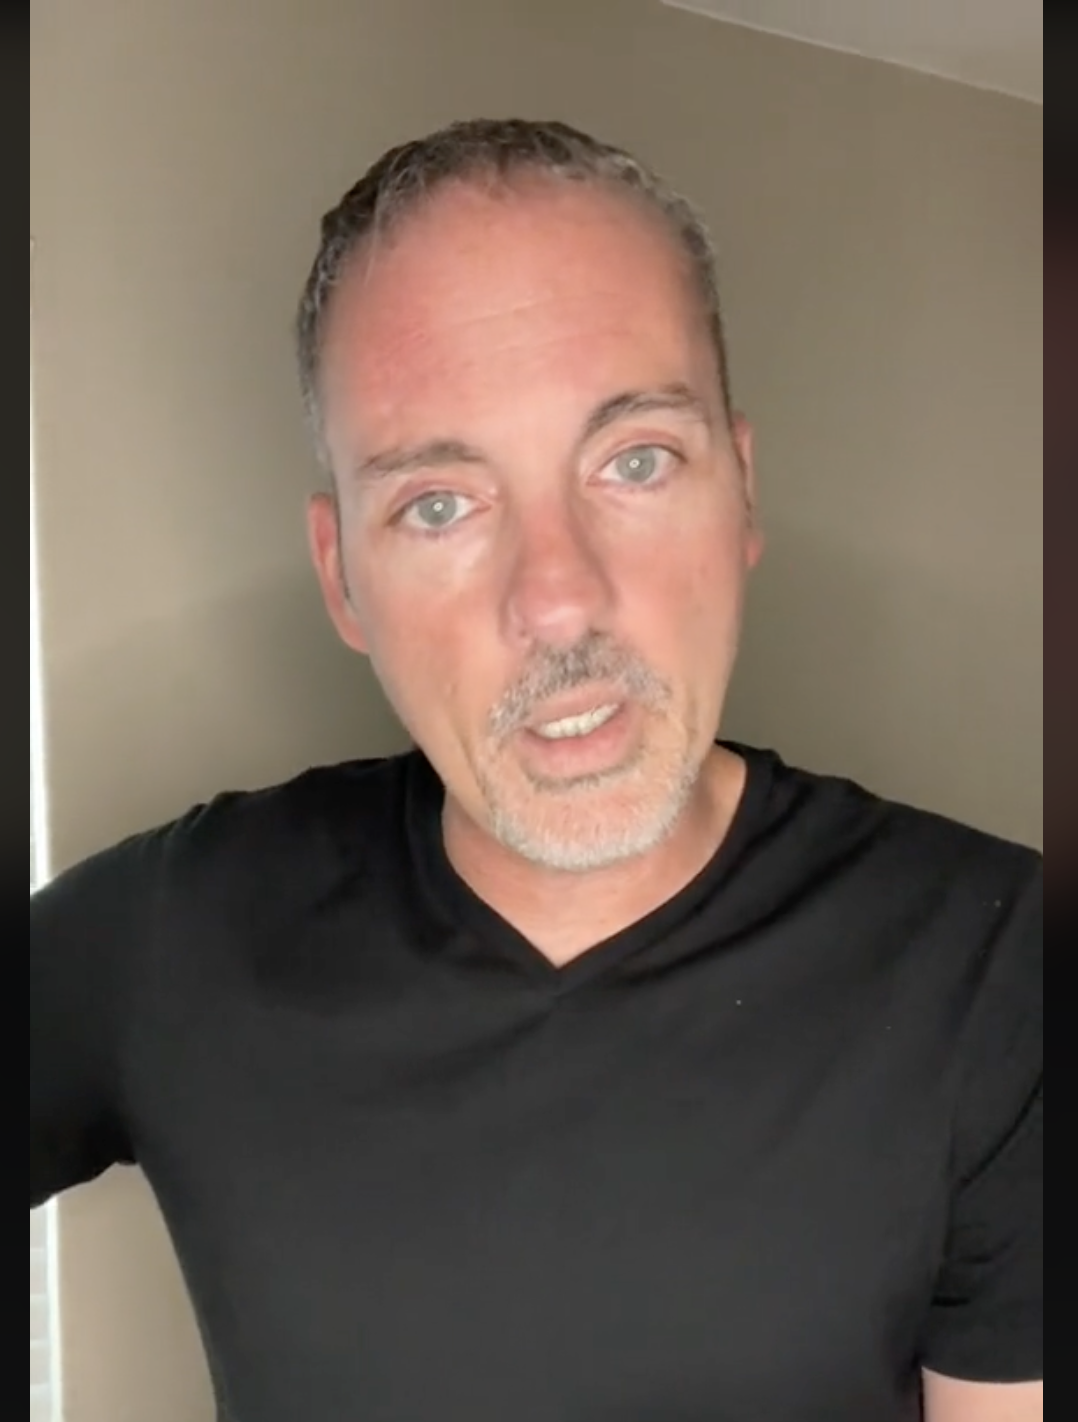 Christian narrating his nightmare dating story, as seen in a video dated August 1, 2022 | Source: TikTok/christiannollinger